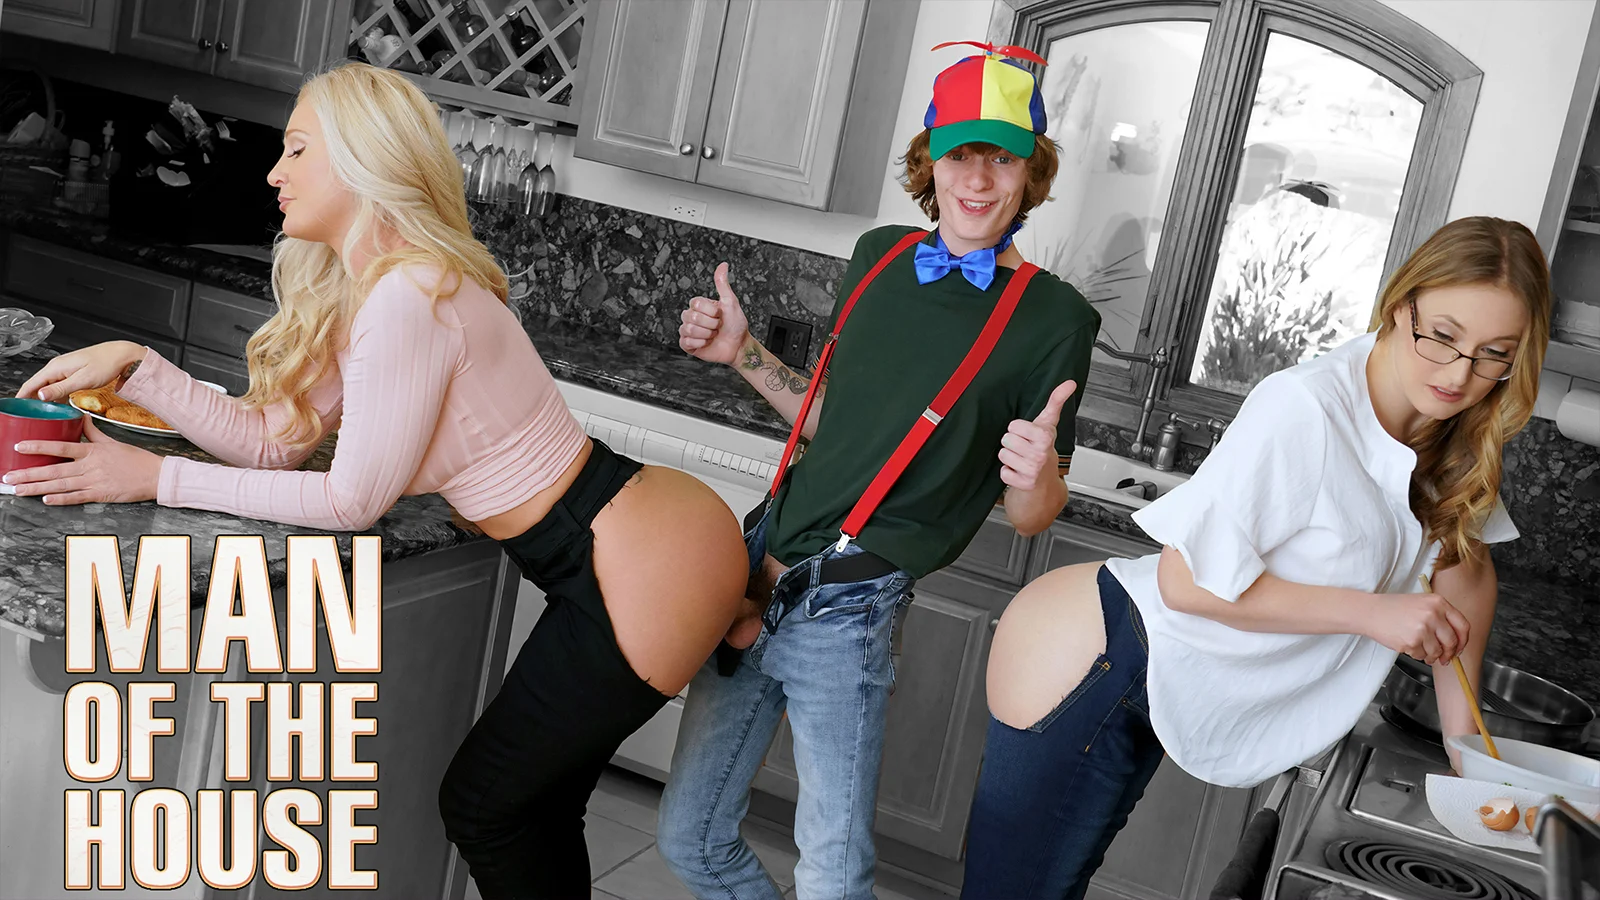 FreeuseMILF &#8211; Ophelia Kaan And Alexis Malone &#8211; Anything For The Man Of The House, PervTube.net